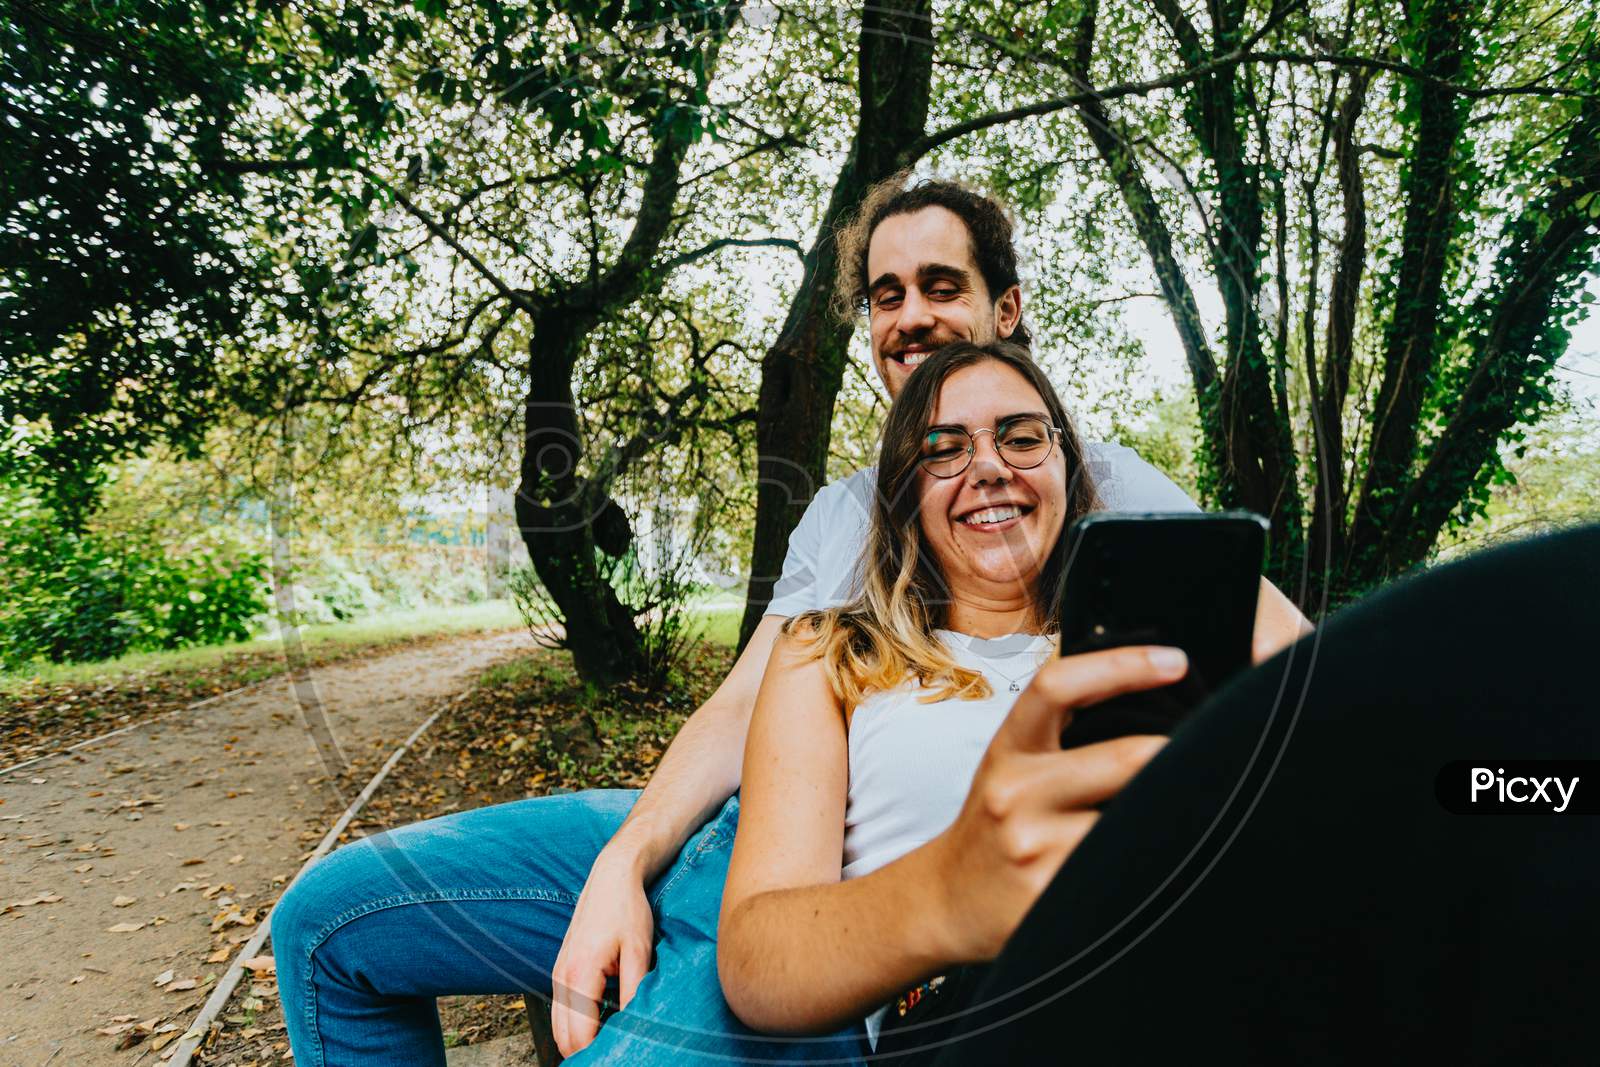 Close Up Of A Young Couple Looking The Mobile Phone While Sitting On A Bench In The Park